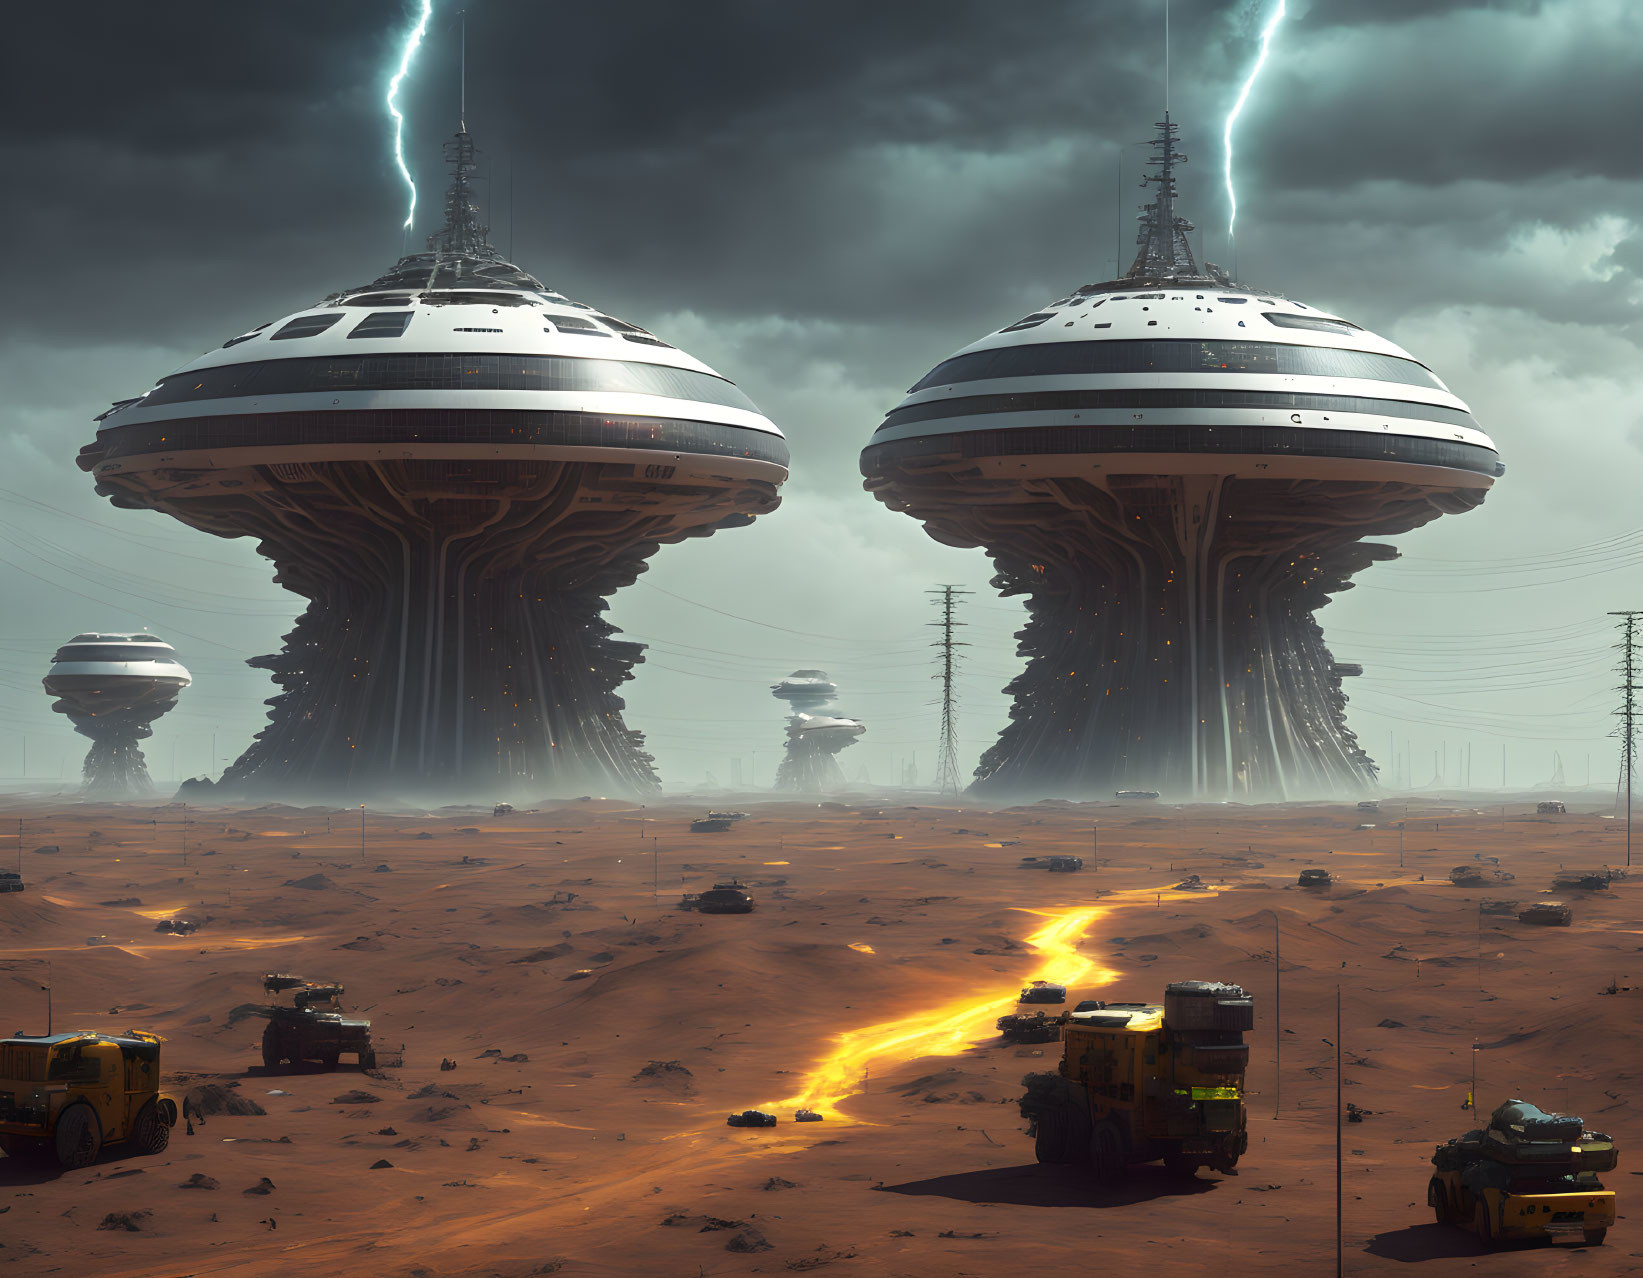 Futuristic desert landscape with mushroom-shaped structures, lightning, and vehicles.